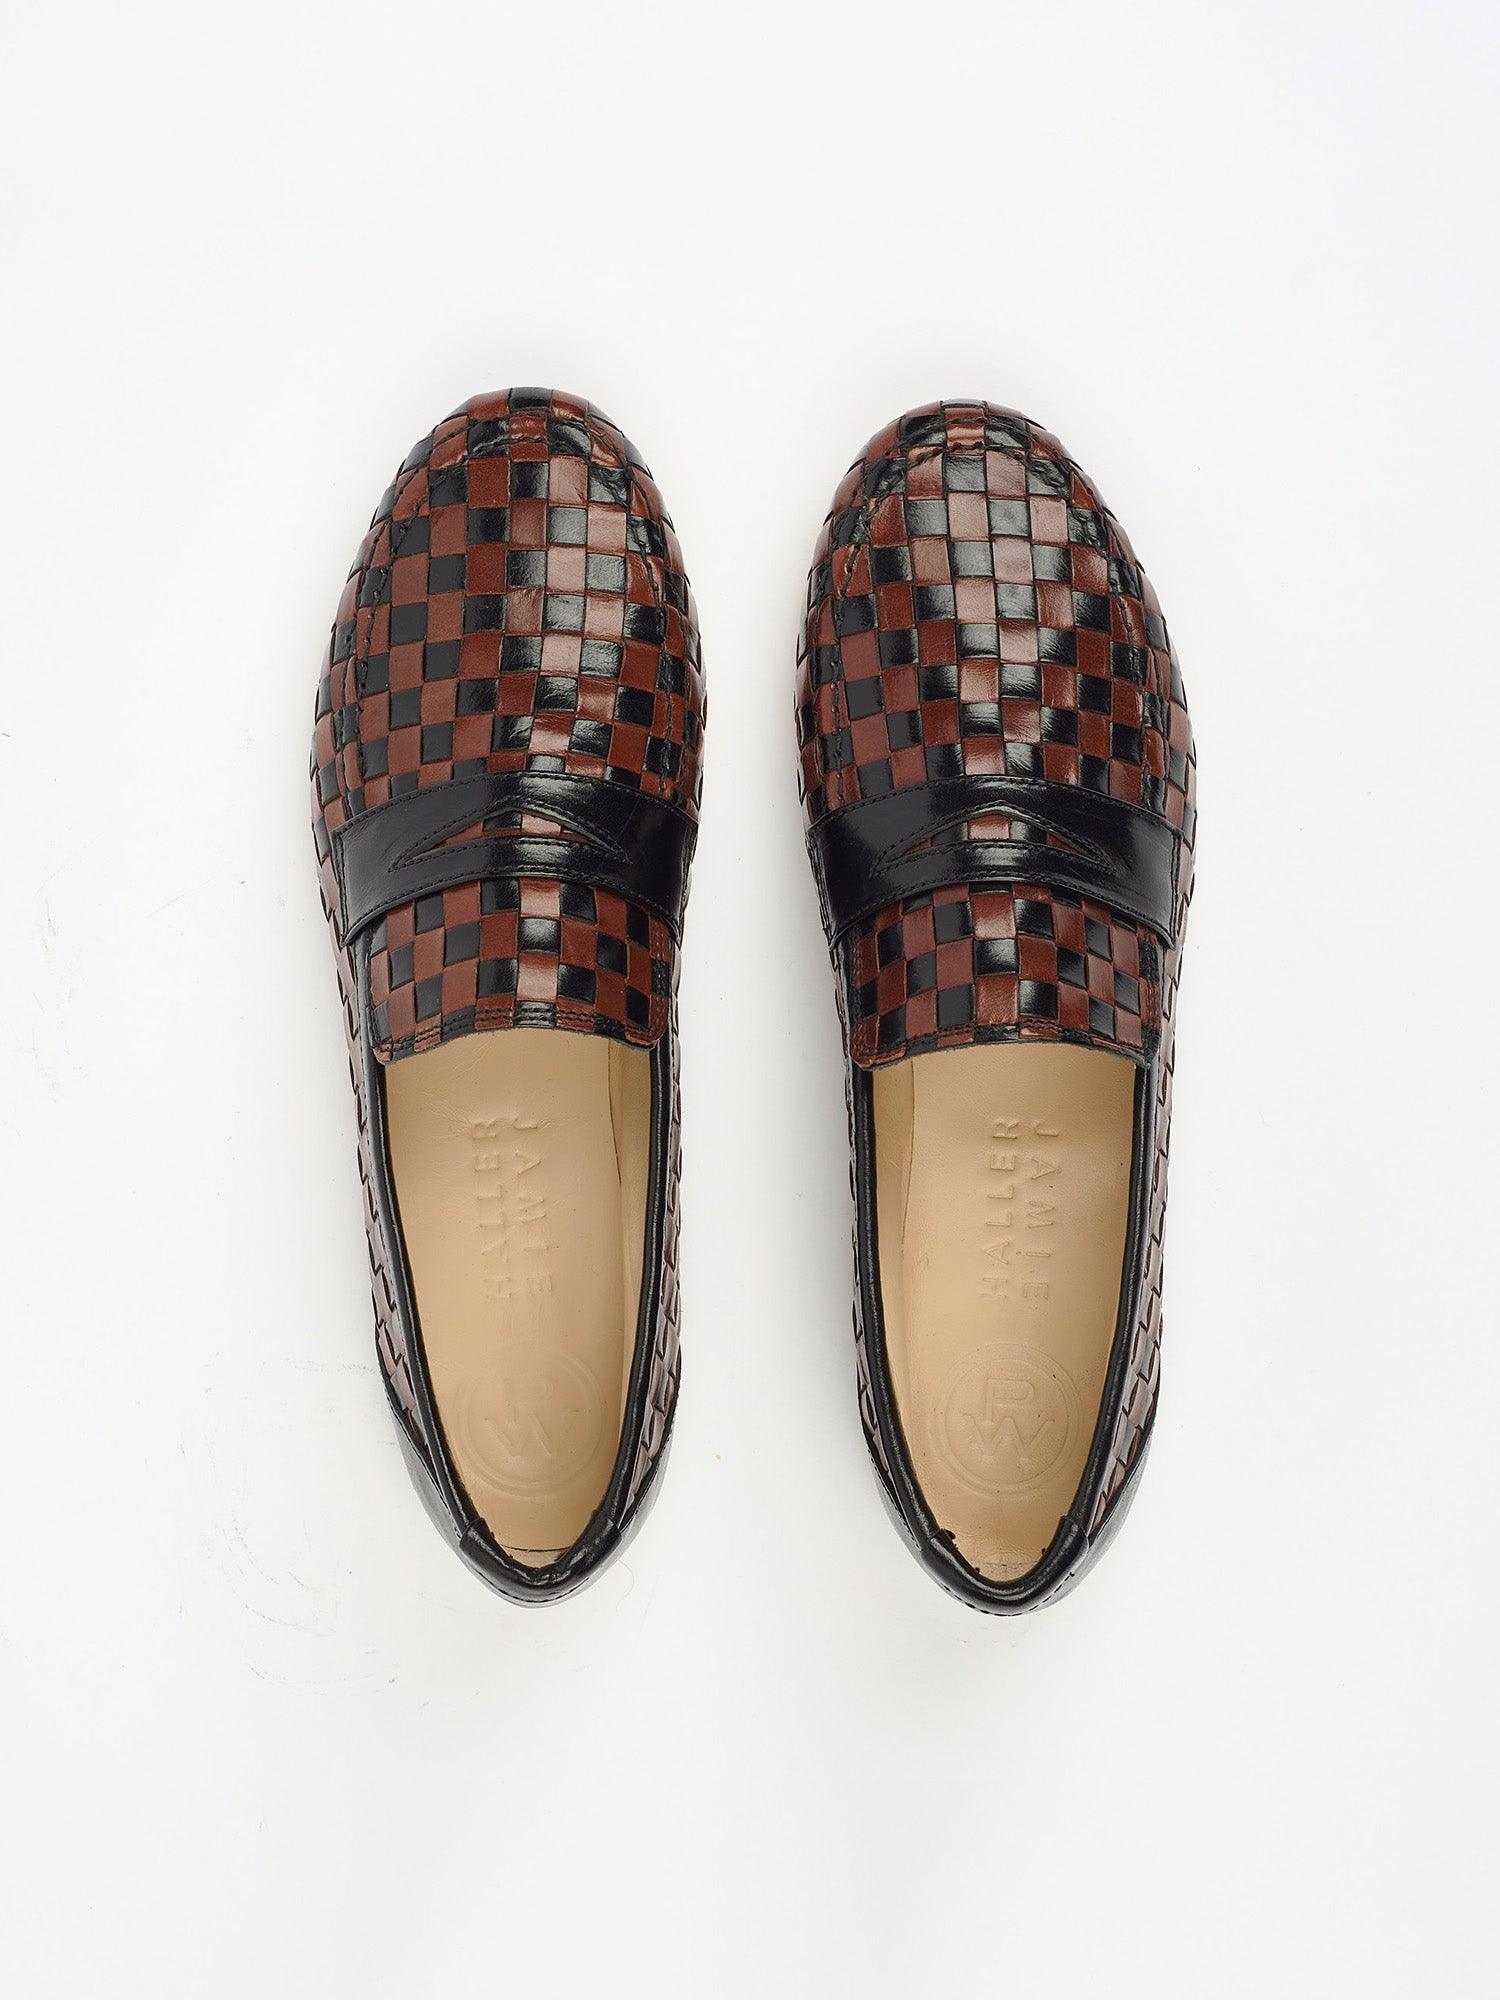 Jamie Haller x PW Woven Loafer in Black & Brown